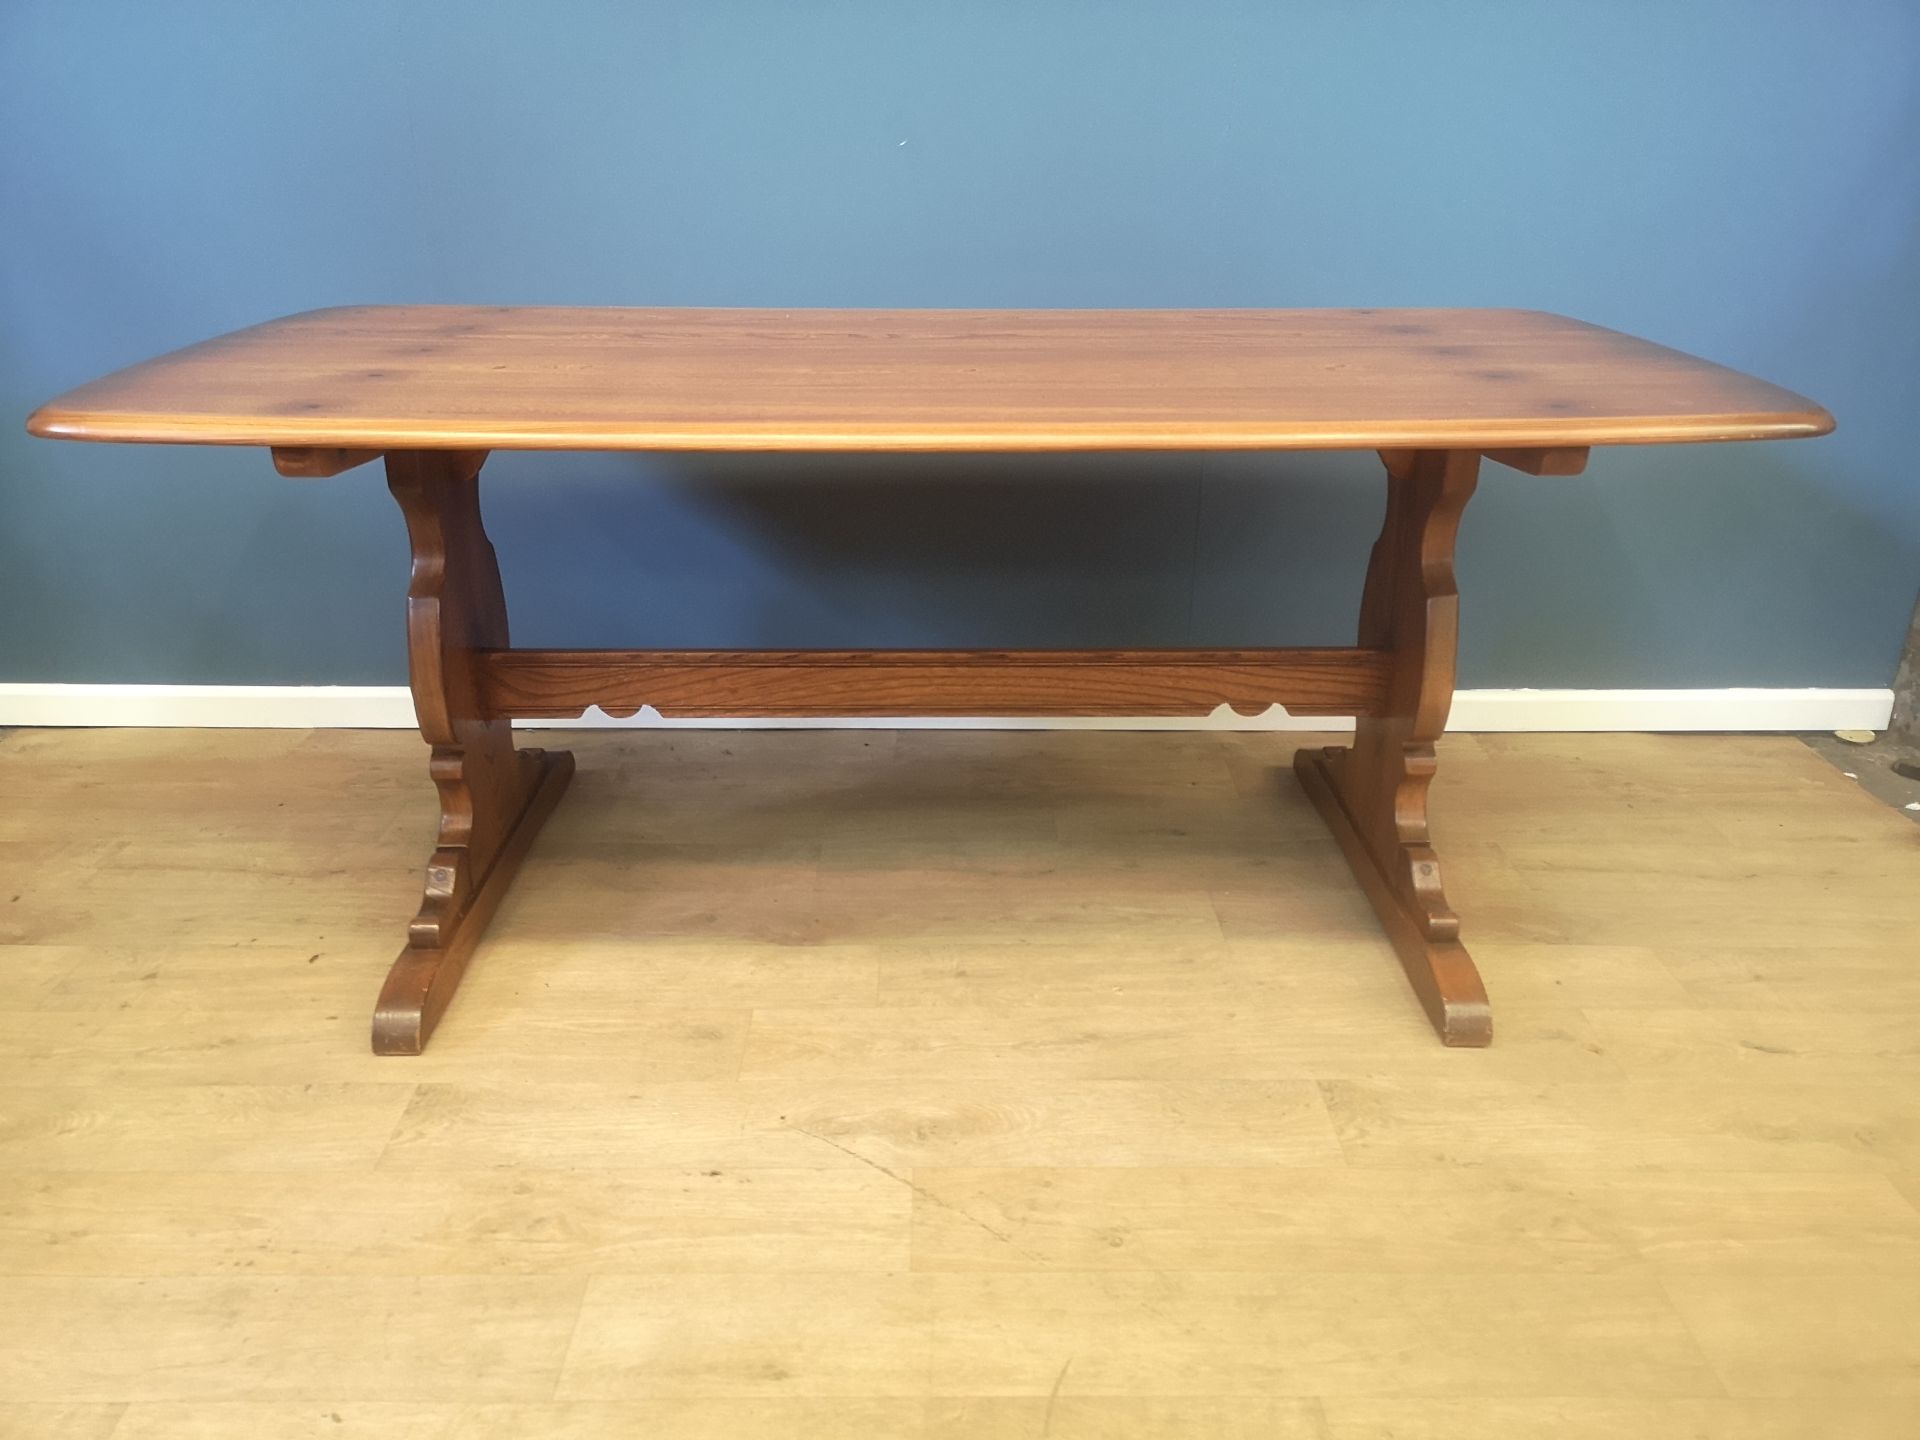 Ercol farmhouse style dining table - Image 2 of 4